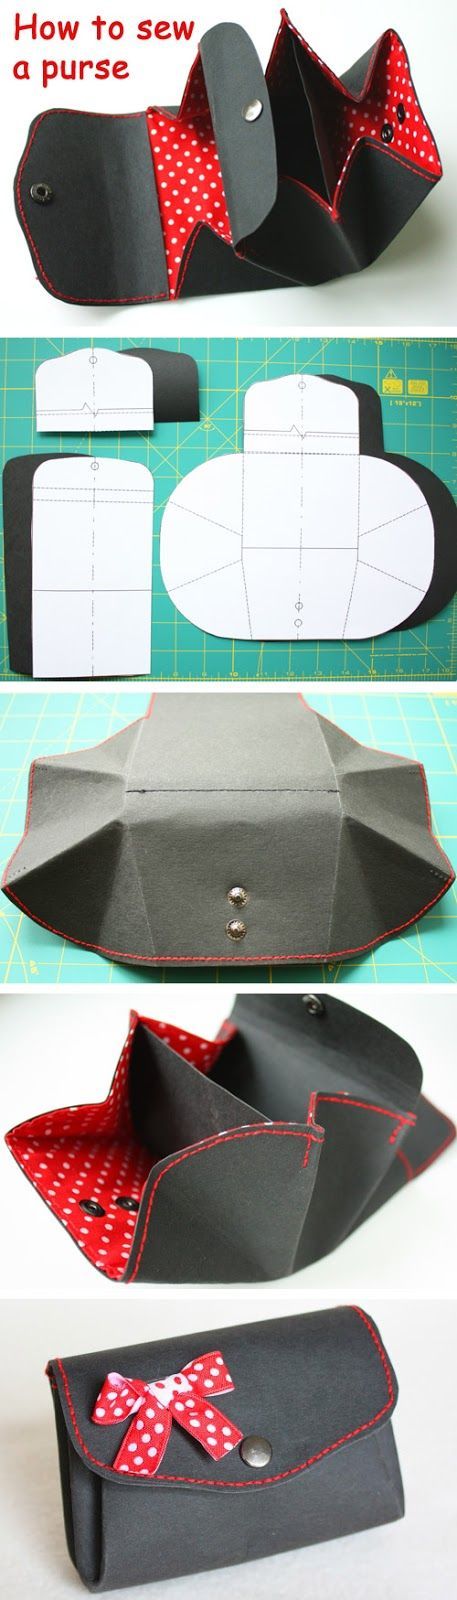 Coin purse made from Kraft-Tex paper. DIY tutorial in pictures.  www.handmadiya.co